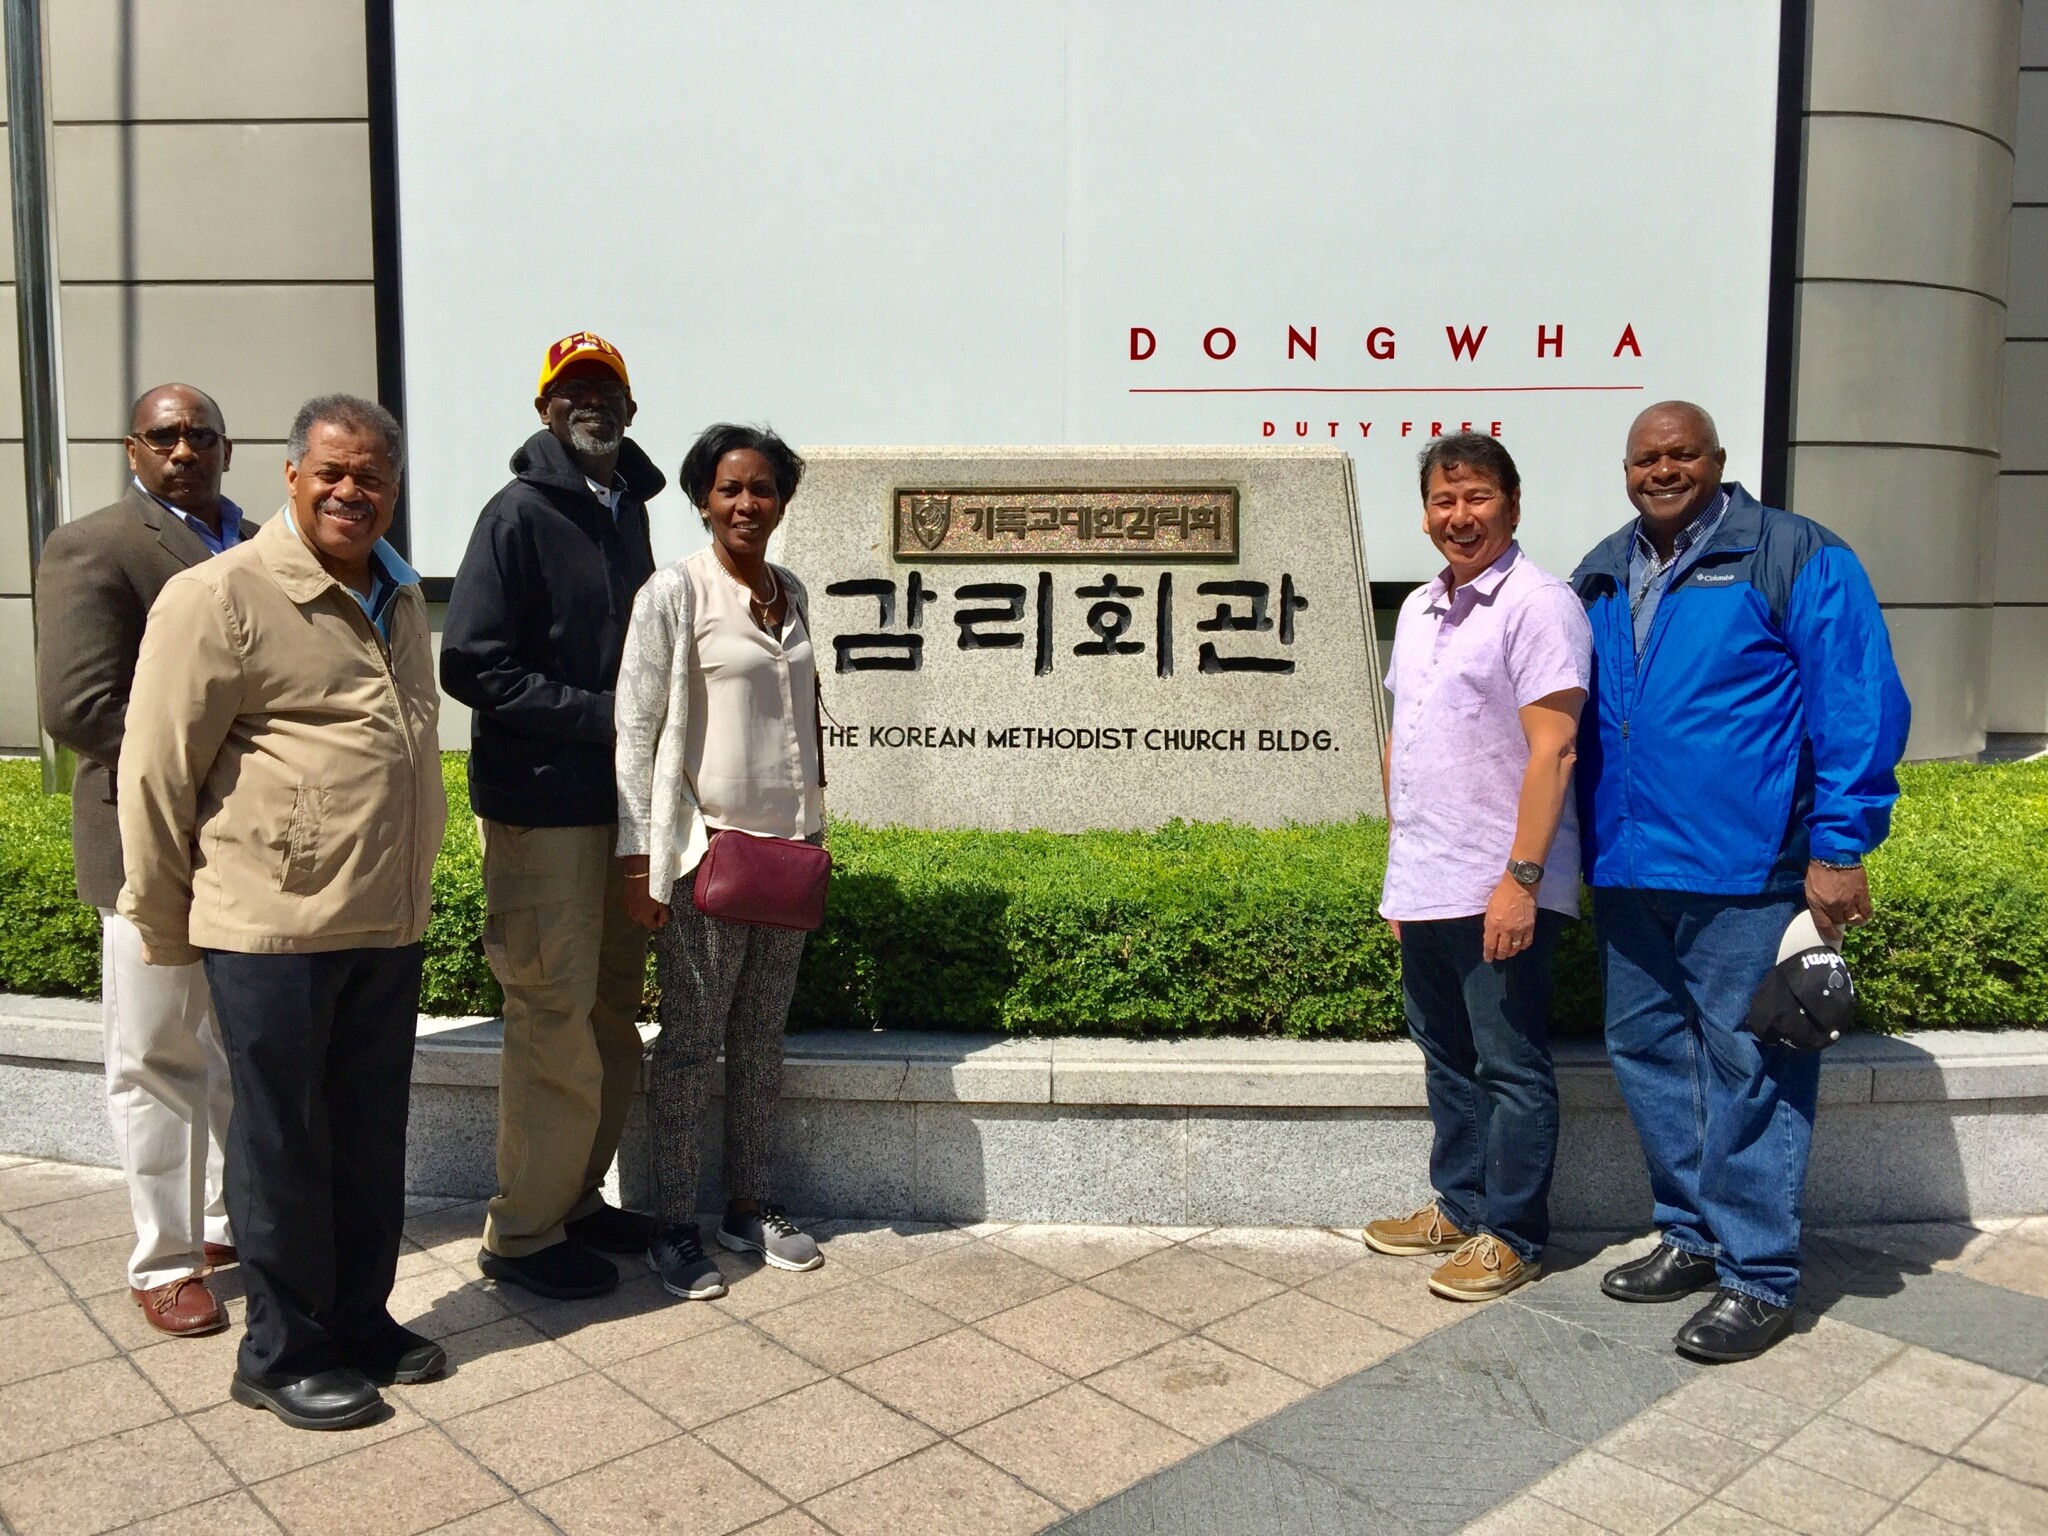 A Journey to South Korea Changes the Lives of Five Pastors